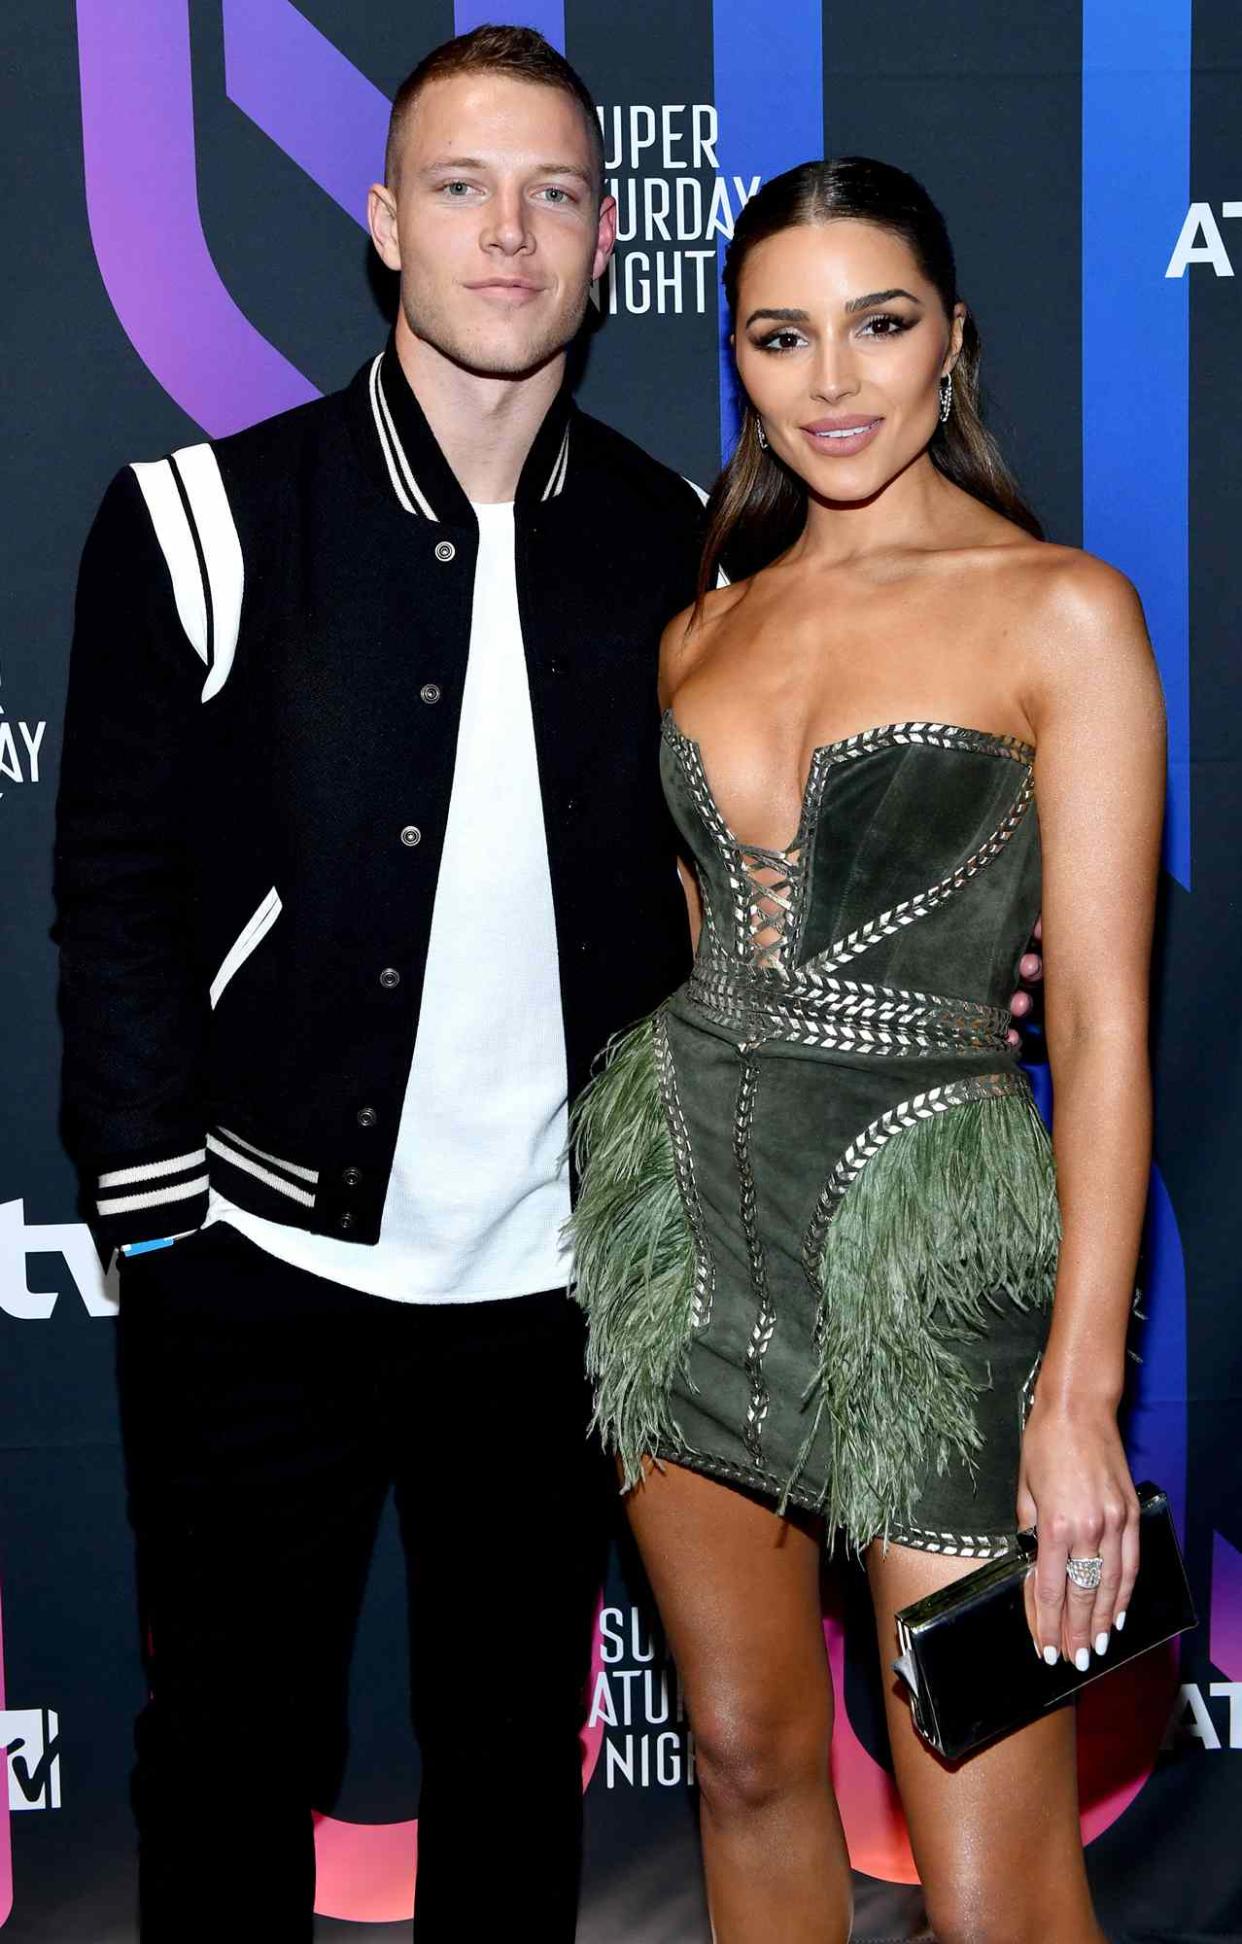 Christian McCaffrey and Olivia Culpo attend AT&T TV Super Saturday Night at Meridian at Island Gardens on February 01, 2020 in Miami, Florida